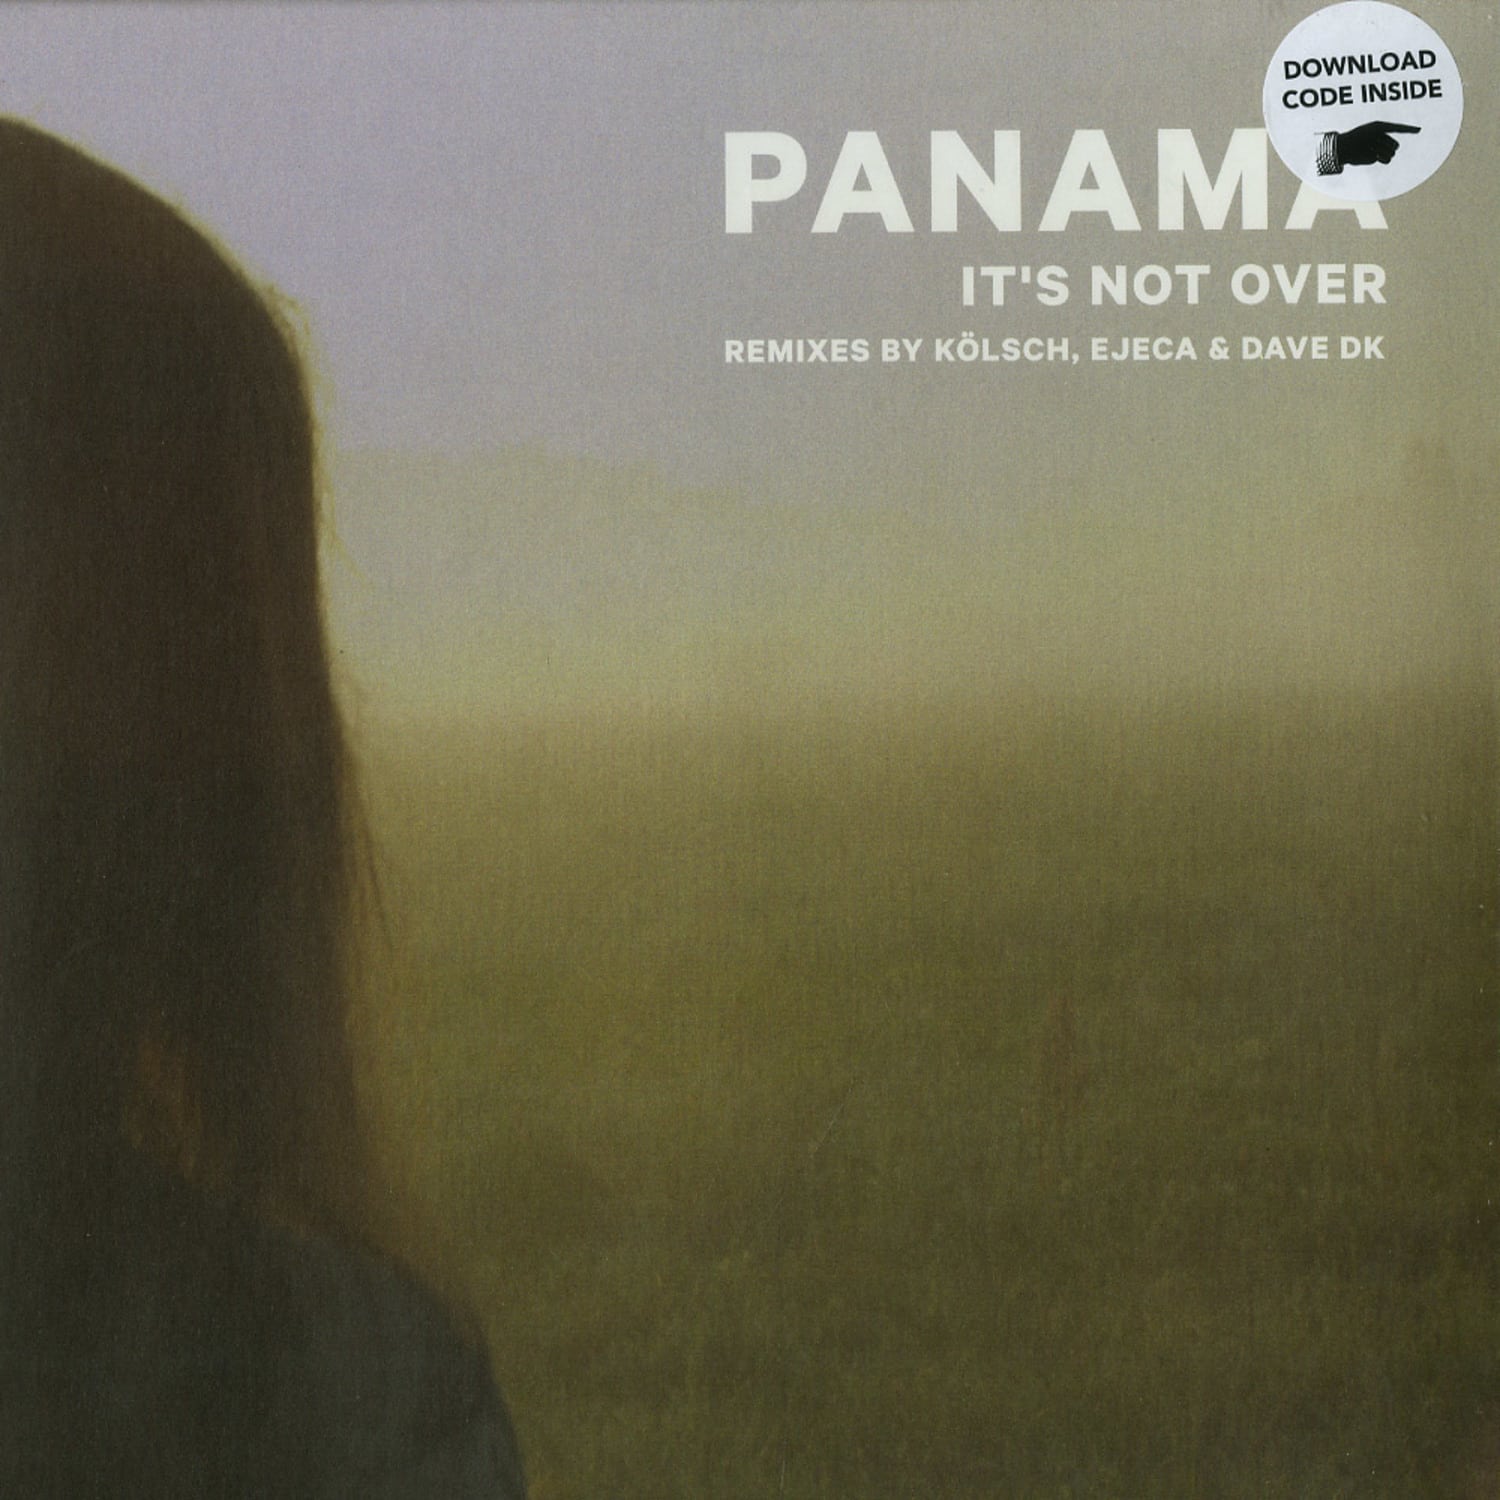 Panama - ITS NOT OVER 